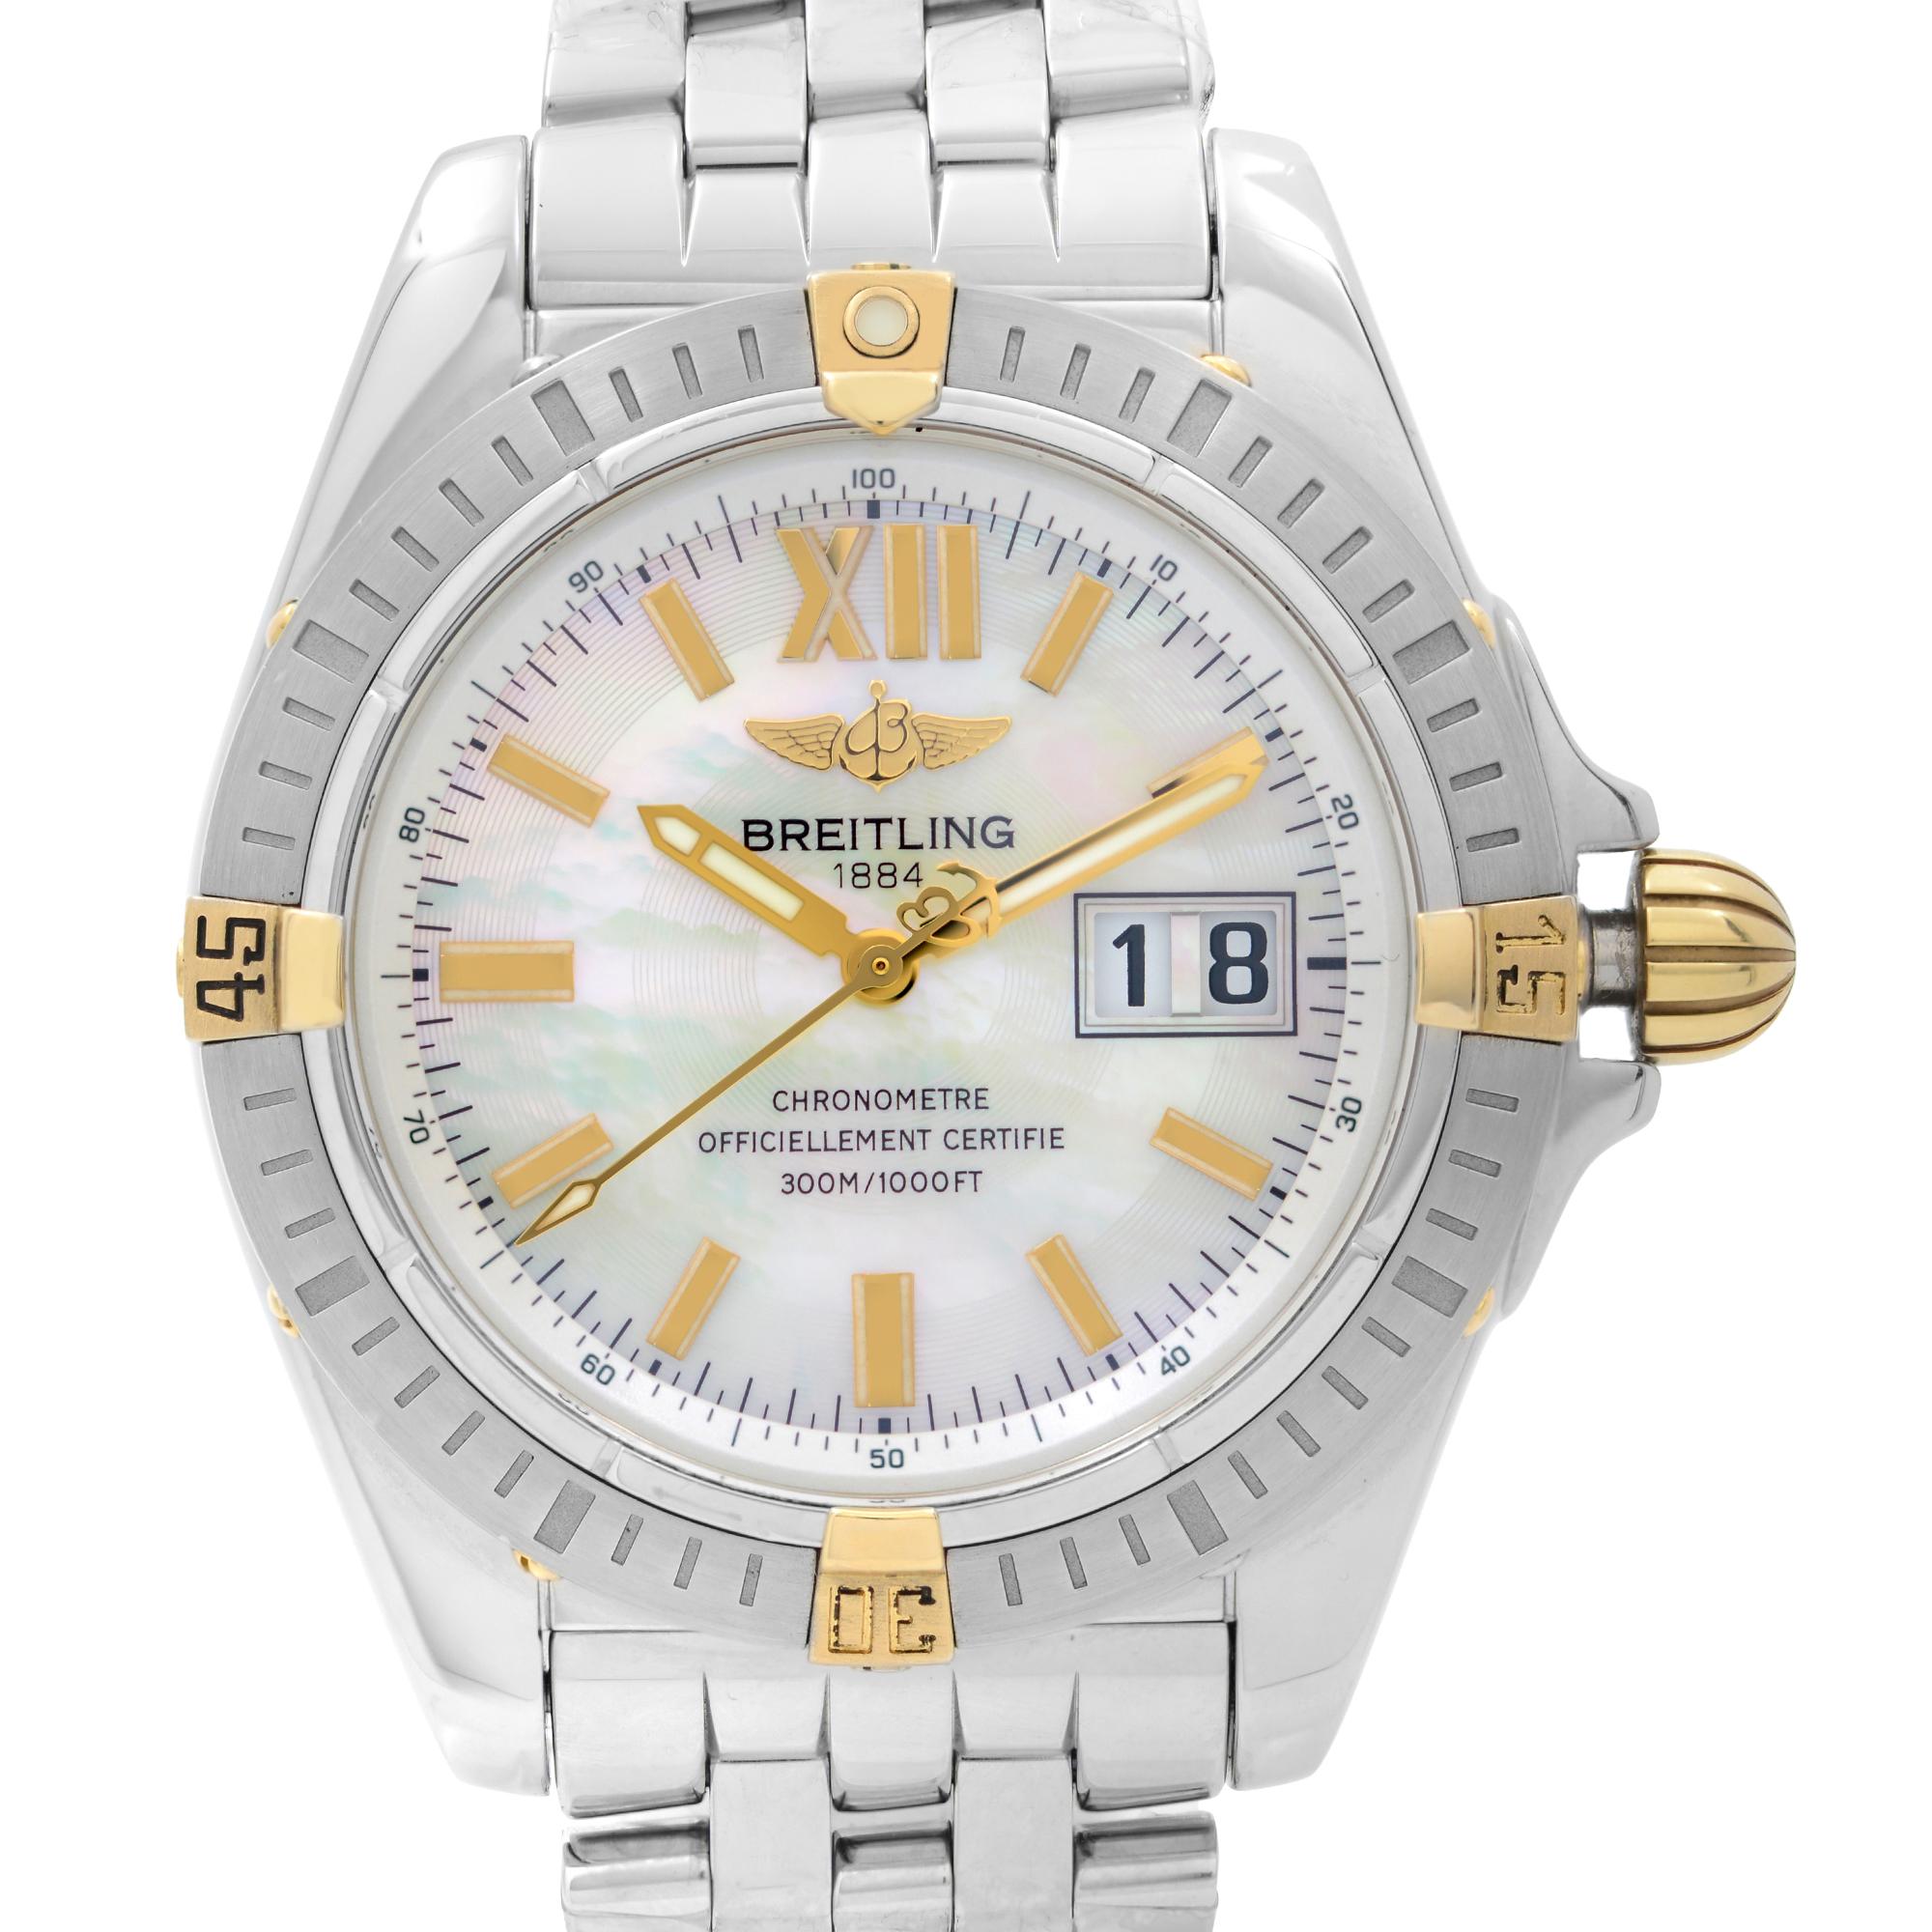 Pre-owned Breitling Windrider Cockpit Stainless Steel MOP Dial Automatic Men's Watch B49350. 18k Gold bezel Riders. This Beautiful Timepiece Features: Stainless Steel Case and Bracelet, Rotating Stainless Steel Bezel, Mother-of-Pearl Dial with